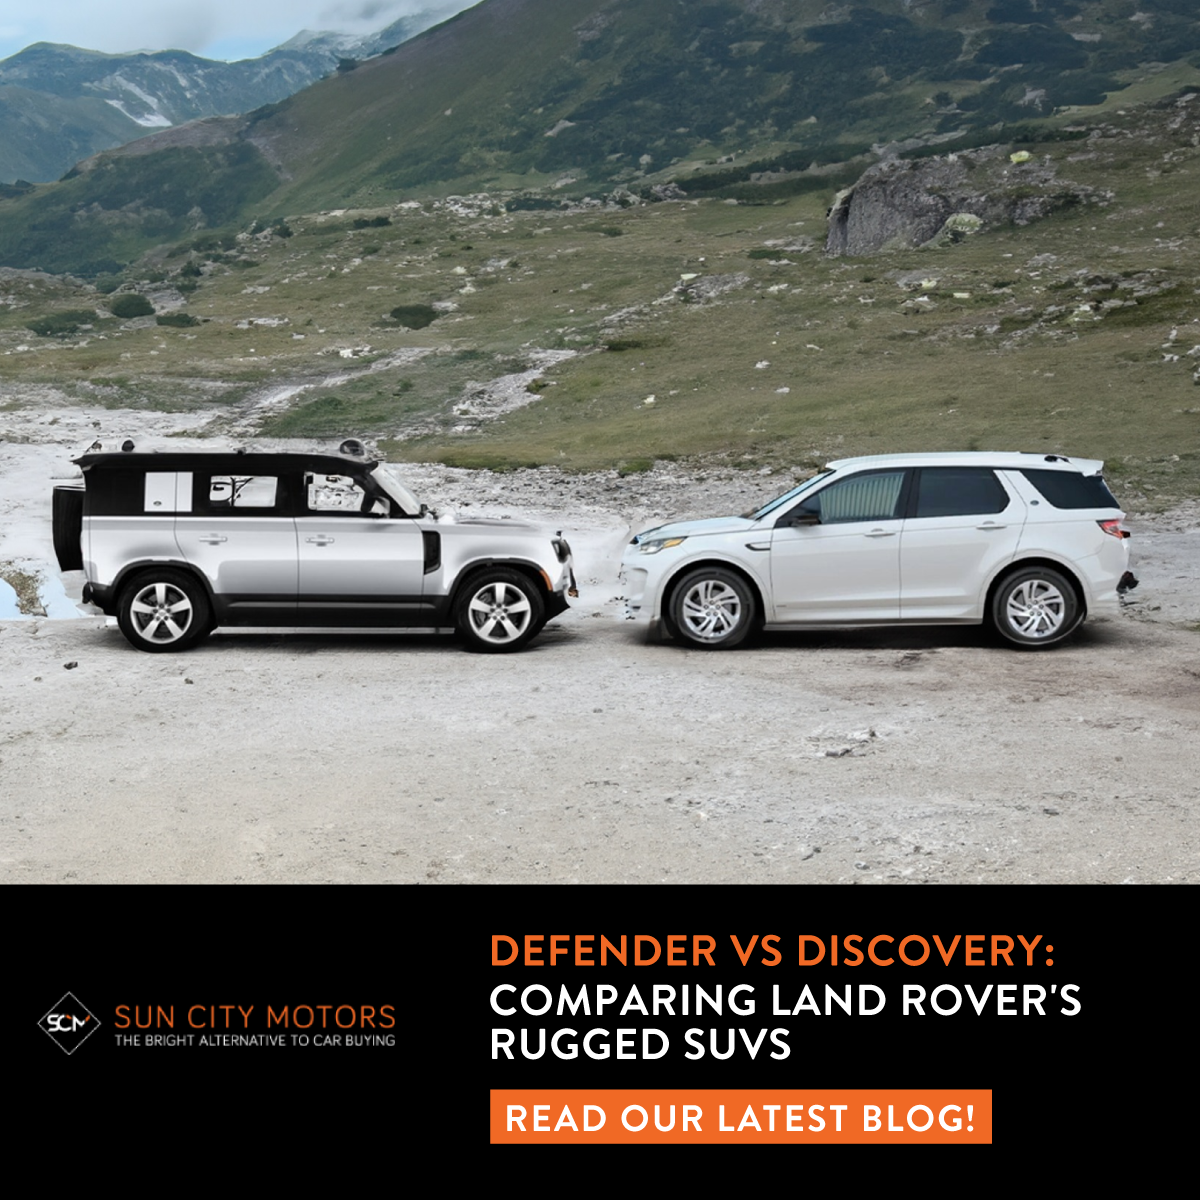 Defender vs Discovery: Comparing Land Rover’s Rugged SUVs